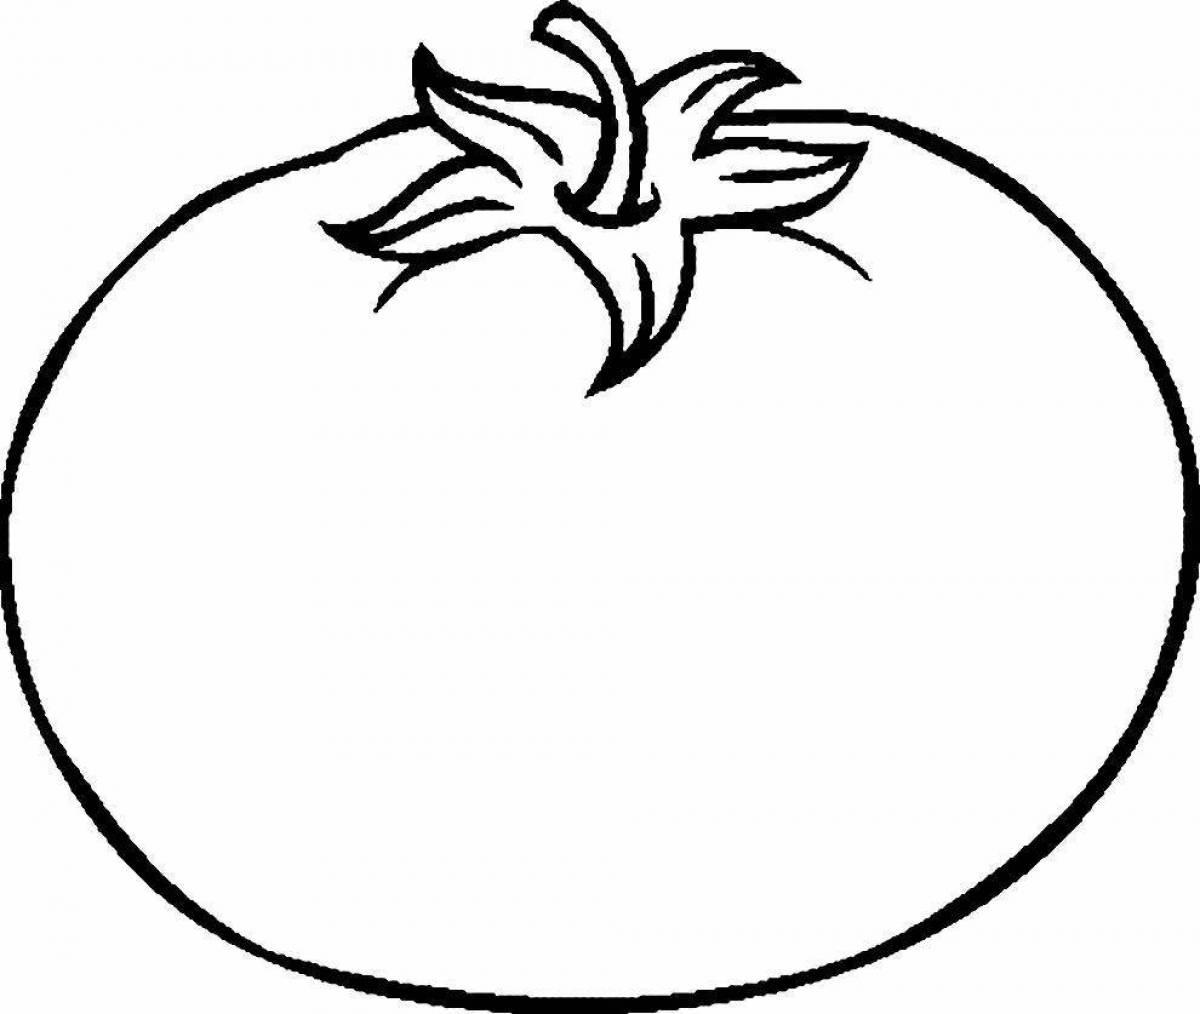 Cute tomato coloring page for kids